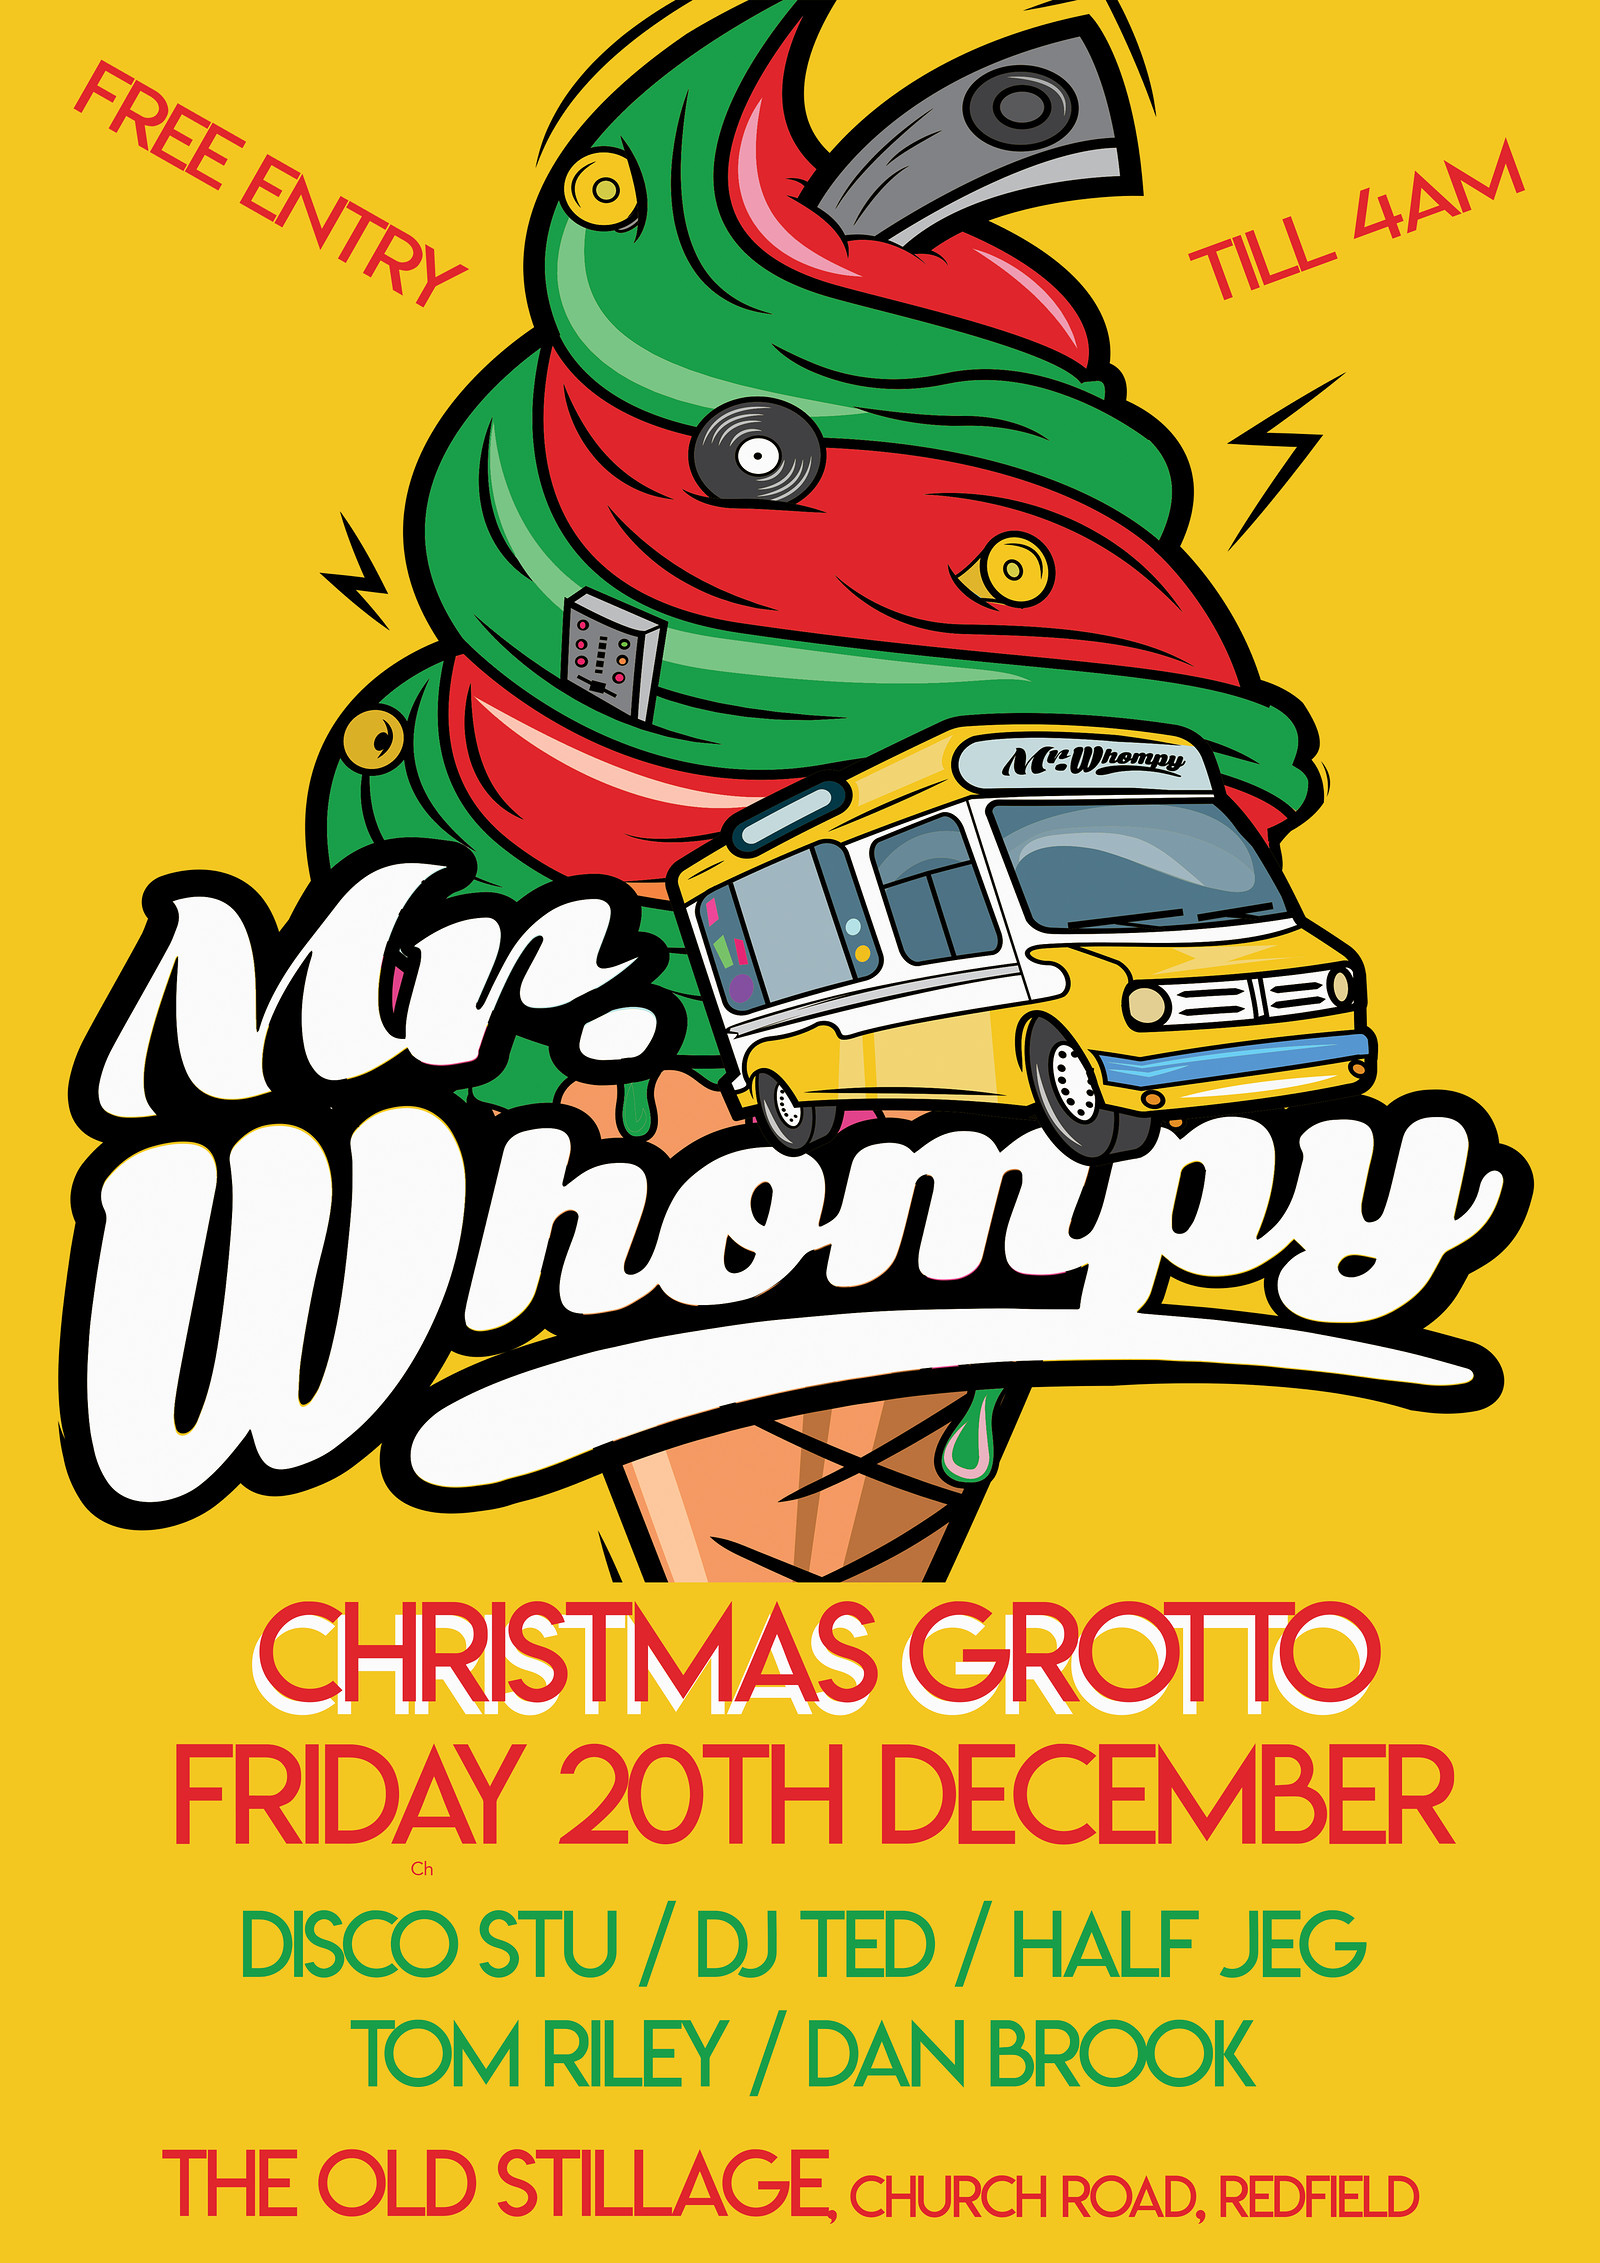 Mr Whompy's Christmas Grotto at The Old Stillage